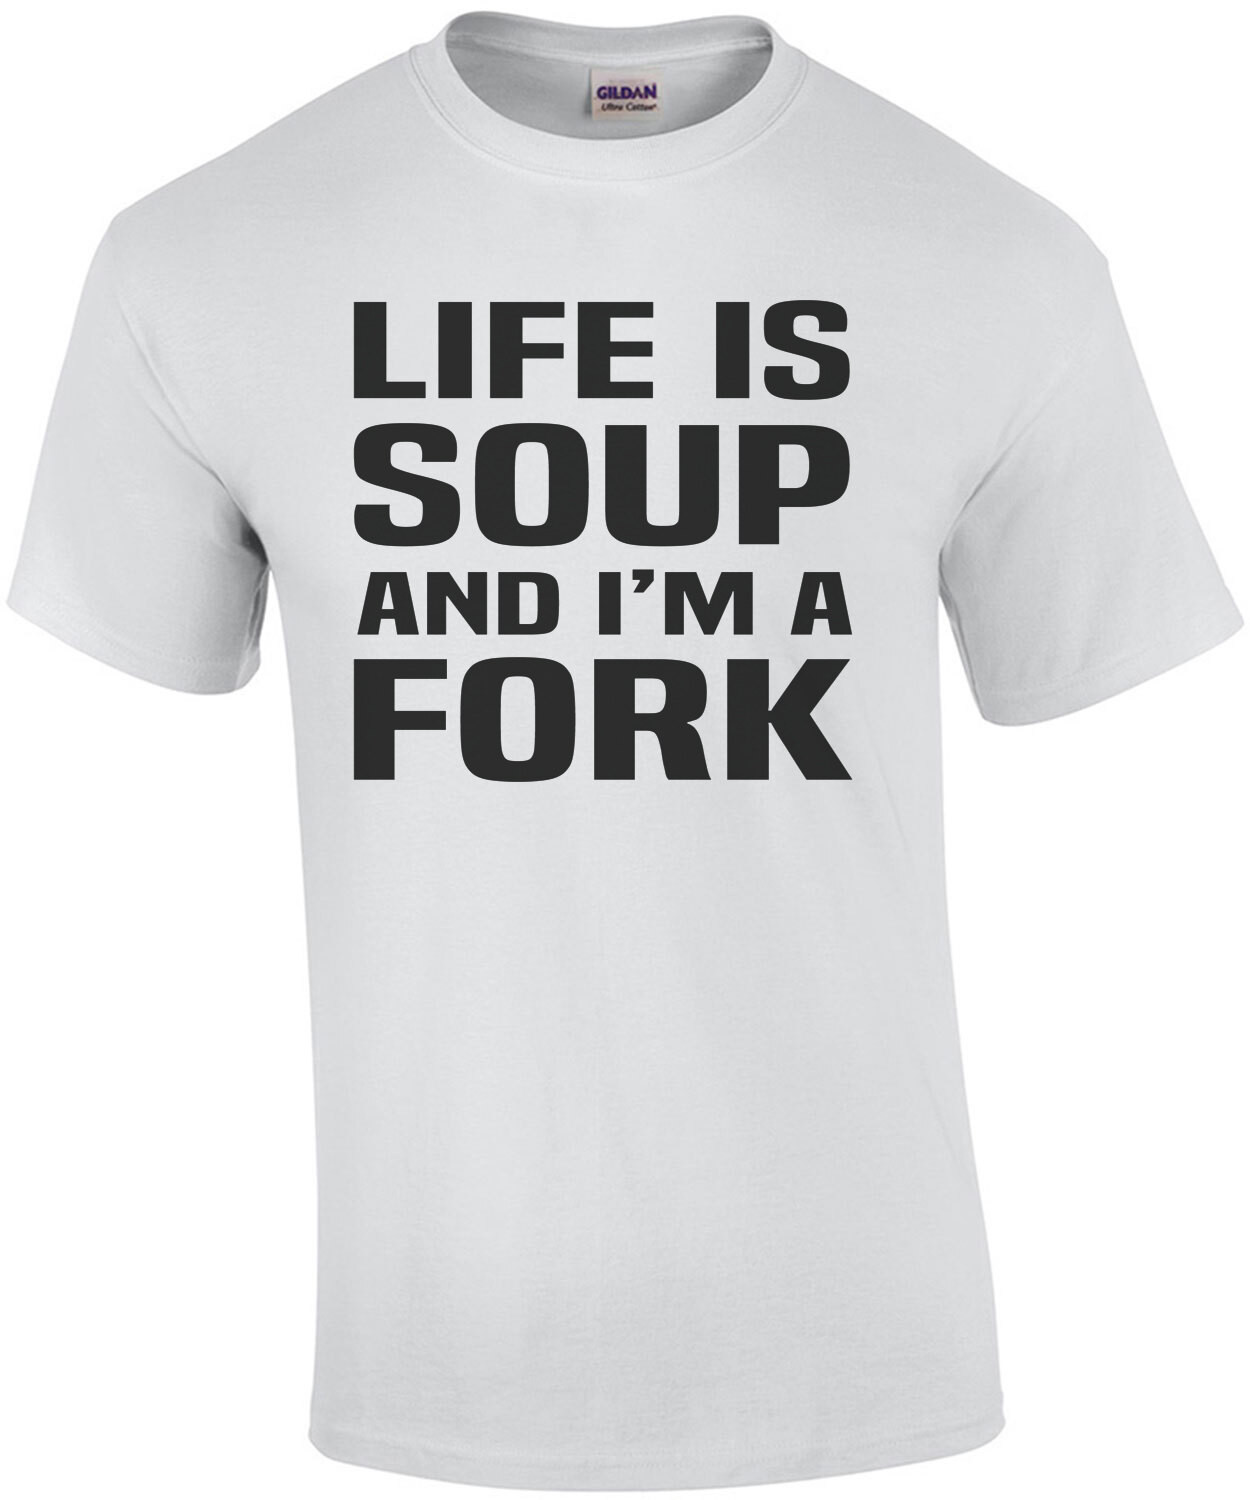 Life is soup and I'm a fork - funny t-shirt